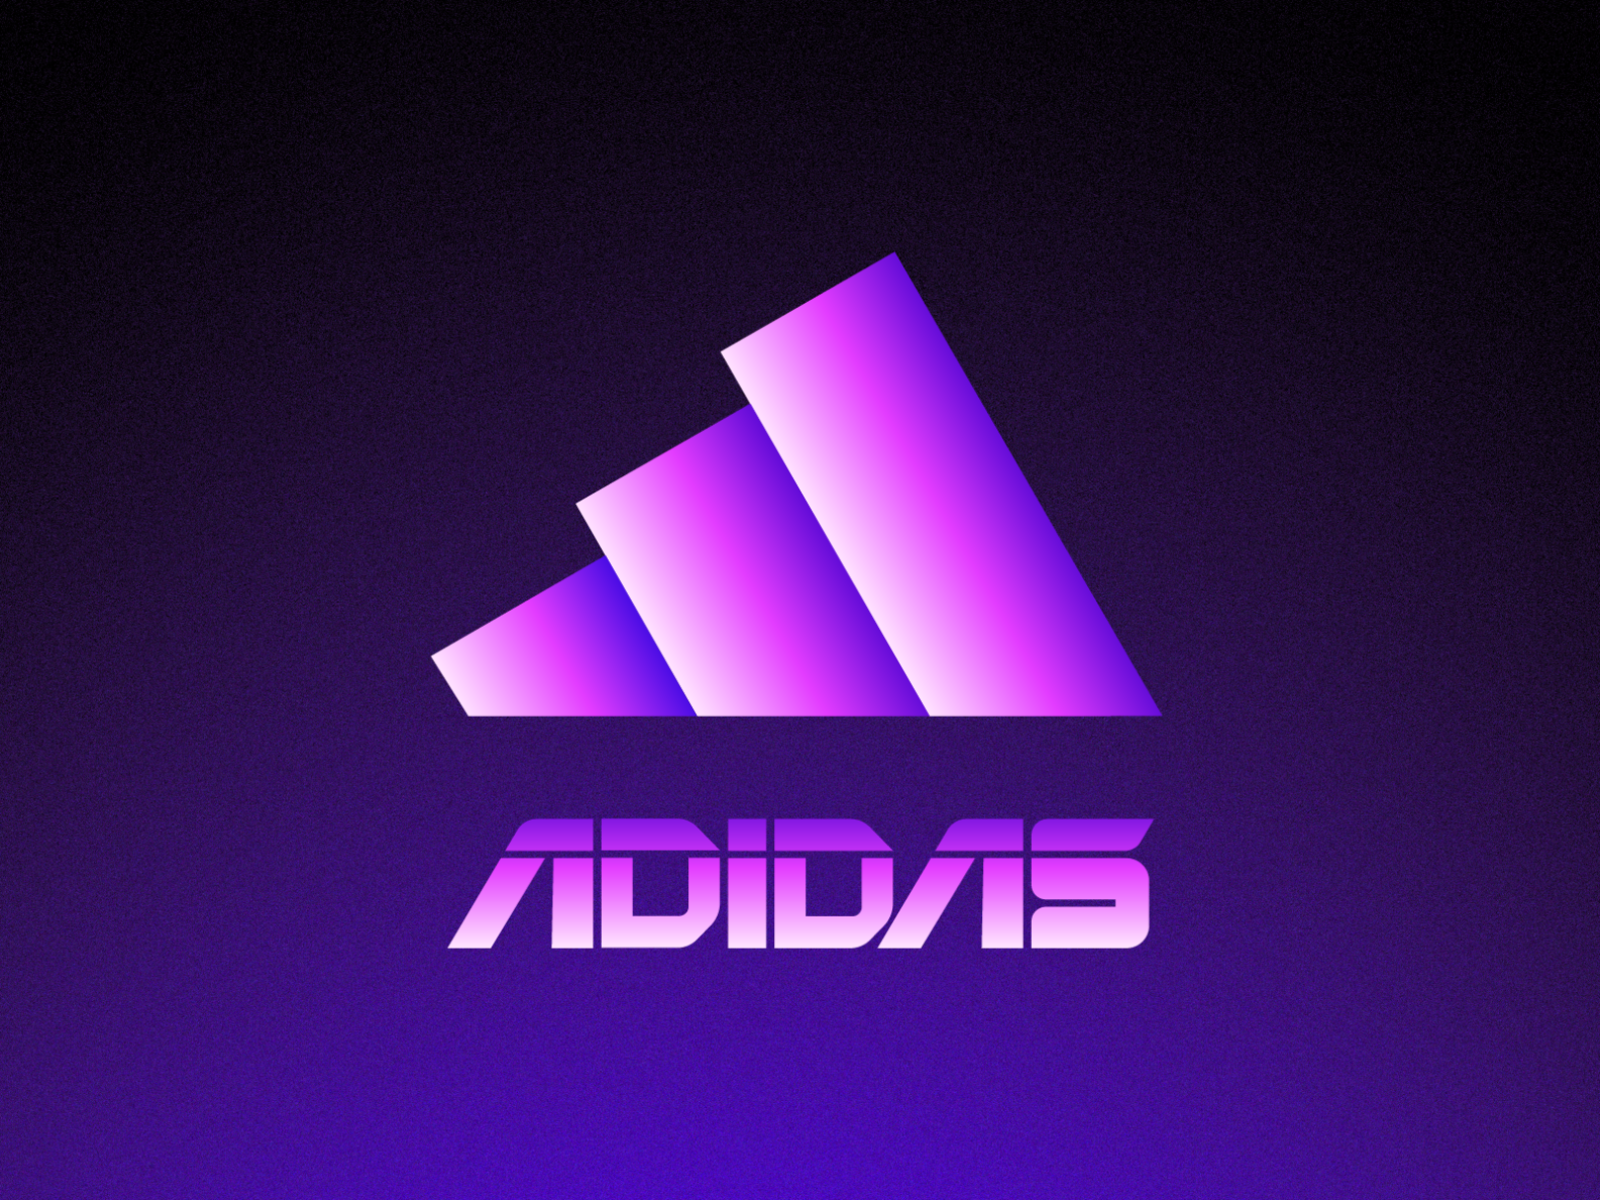 Adidas Wallpapers Top Best 65 Adidas Backgrounds Download